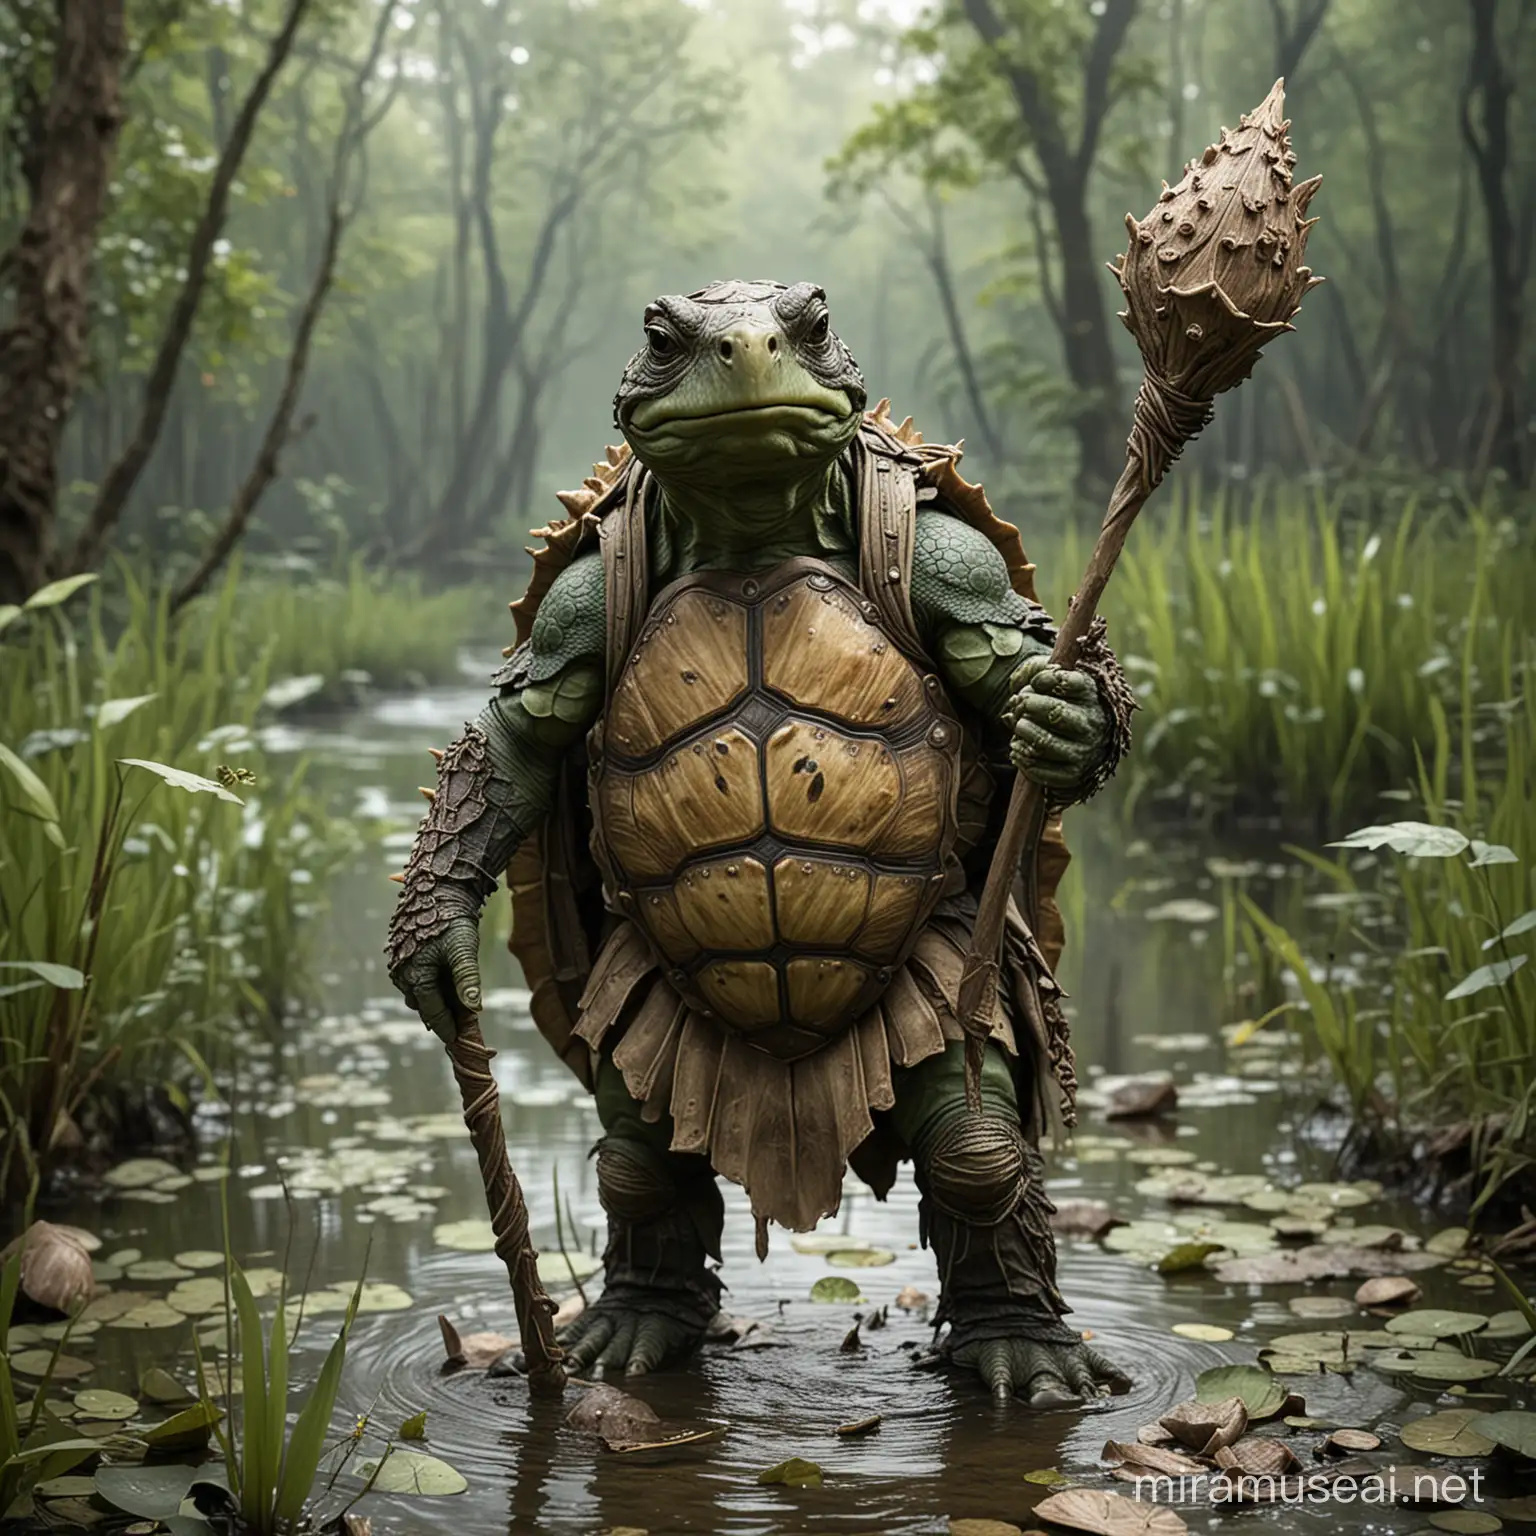 Mystical Tortle Druid with Knobby Staff in Swamp Setting